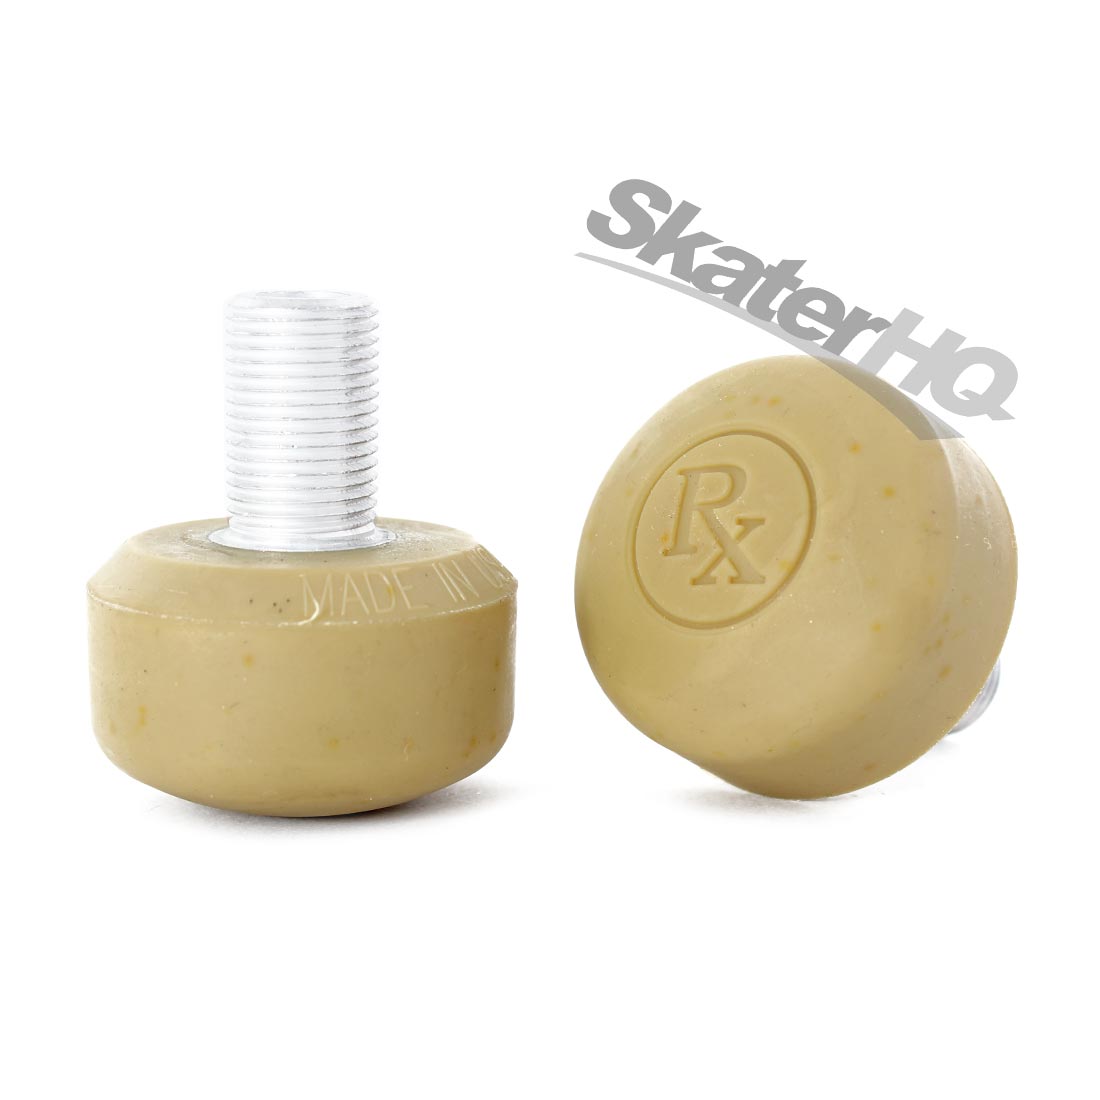 Sure-Grip RX Toe Stop Pair - Natural/Gum Roller Skate Hardware and Parts